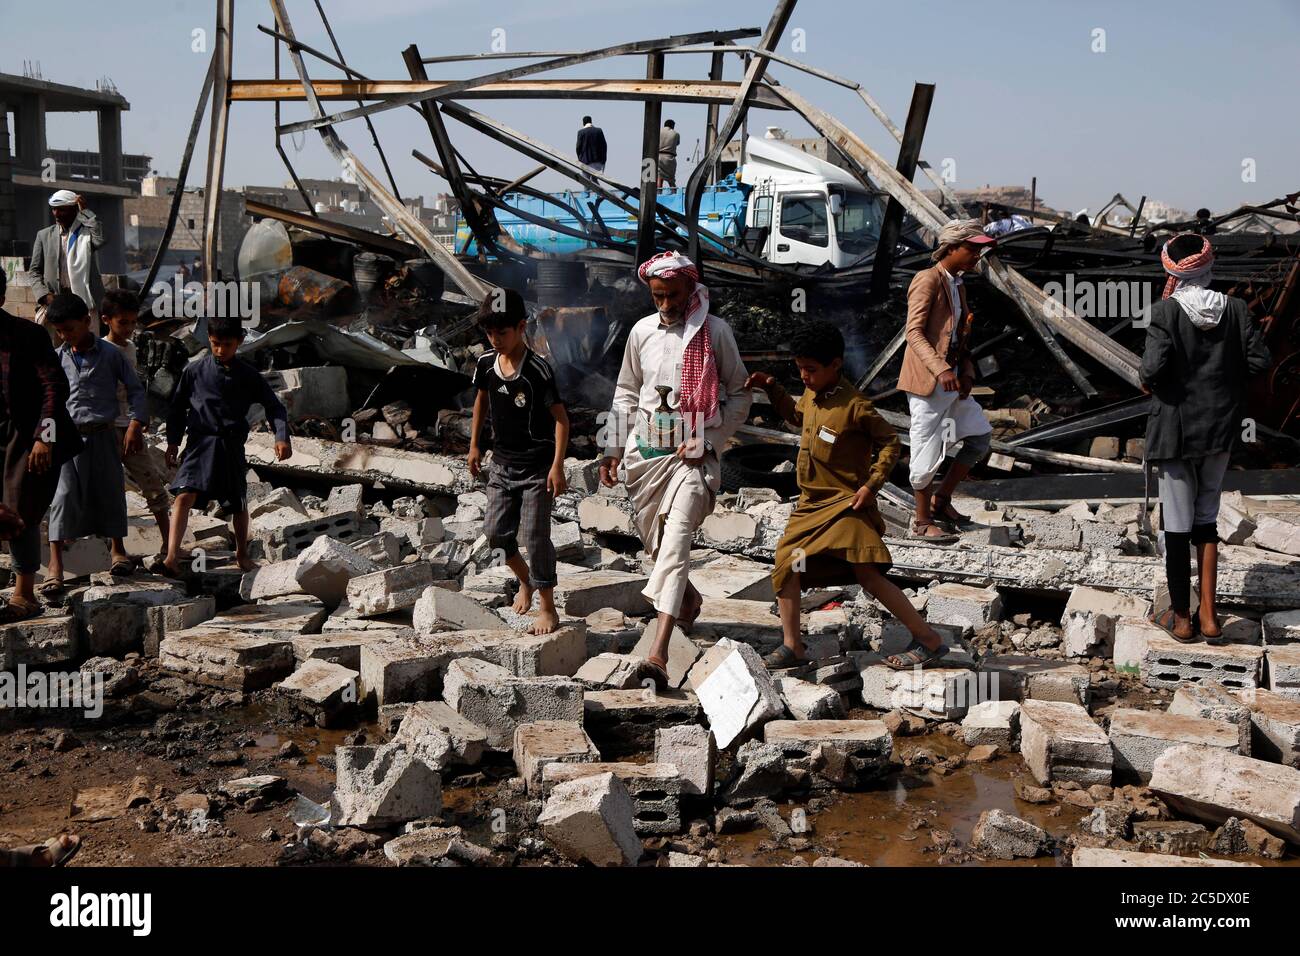 Sanaa, Yemen. 2nd July, 2020. Yemeni people walk on the rubble of a warehouse after it was hit by airstrikes in Sanaa, Yemen, on July 2, 2020. The Saudi-led coalition on Wednesday launched a series of airstrikes on the Yemeni capital Sanaa, which is under Houthi control, the Houthi-run al-Masirah TV reported. Credit: Mohammed Mohammed/Xinhua/Alamy Live News Stock Photo